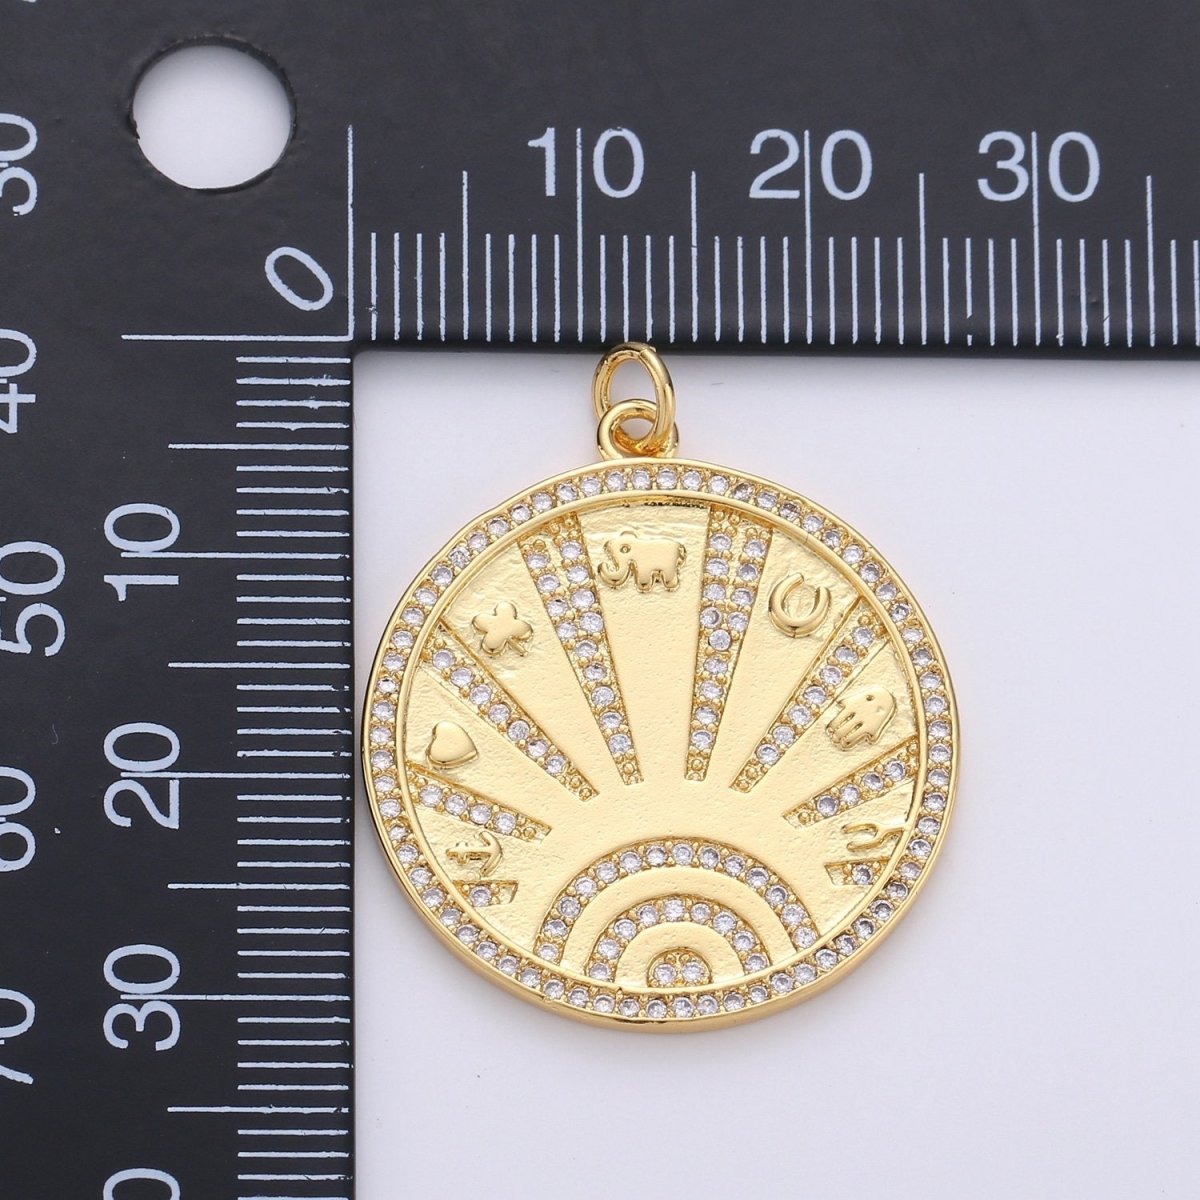 New Gold Lucky Coin Talisman Charm Necklace, 14k Gold Filled Disc Round Pendant Lucky Medallion Pendant for Necklace Jewelry Making Supply D-339 - DLUXCA